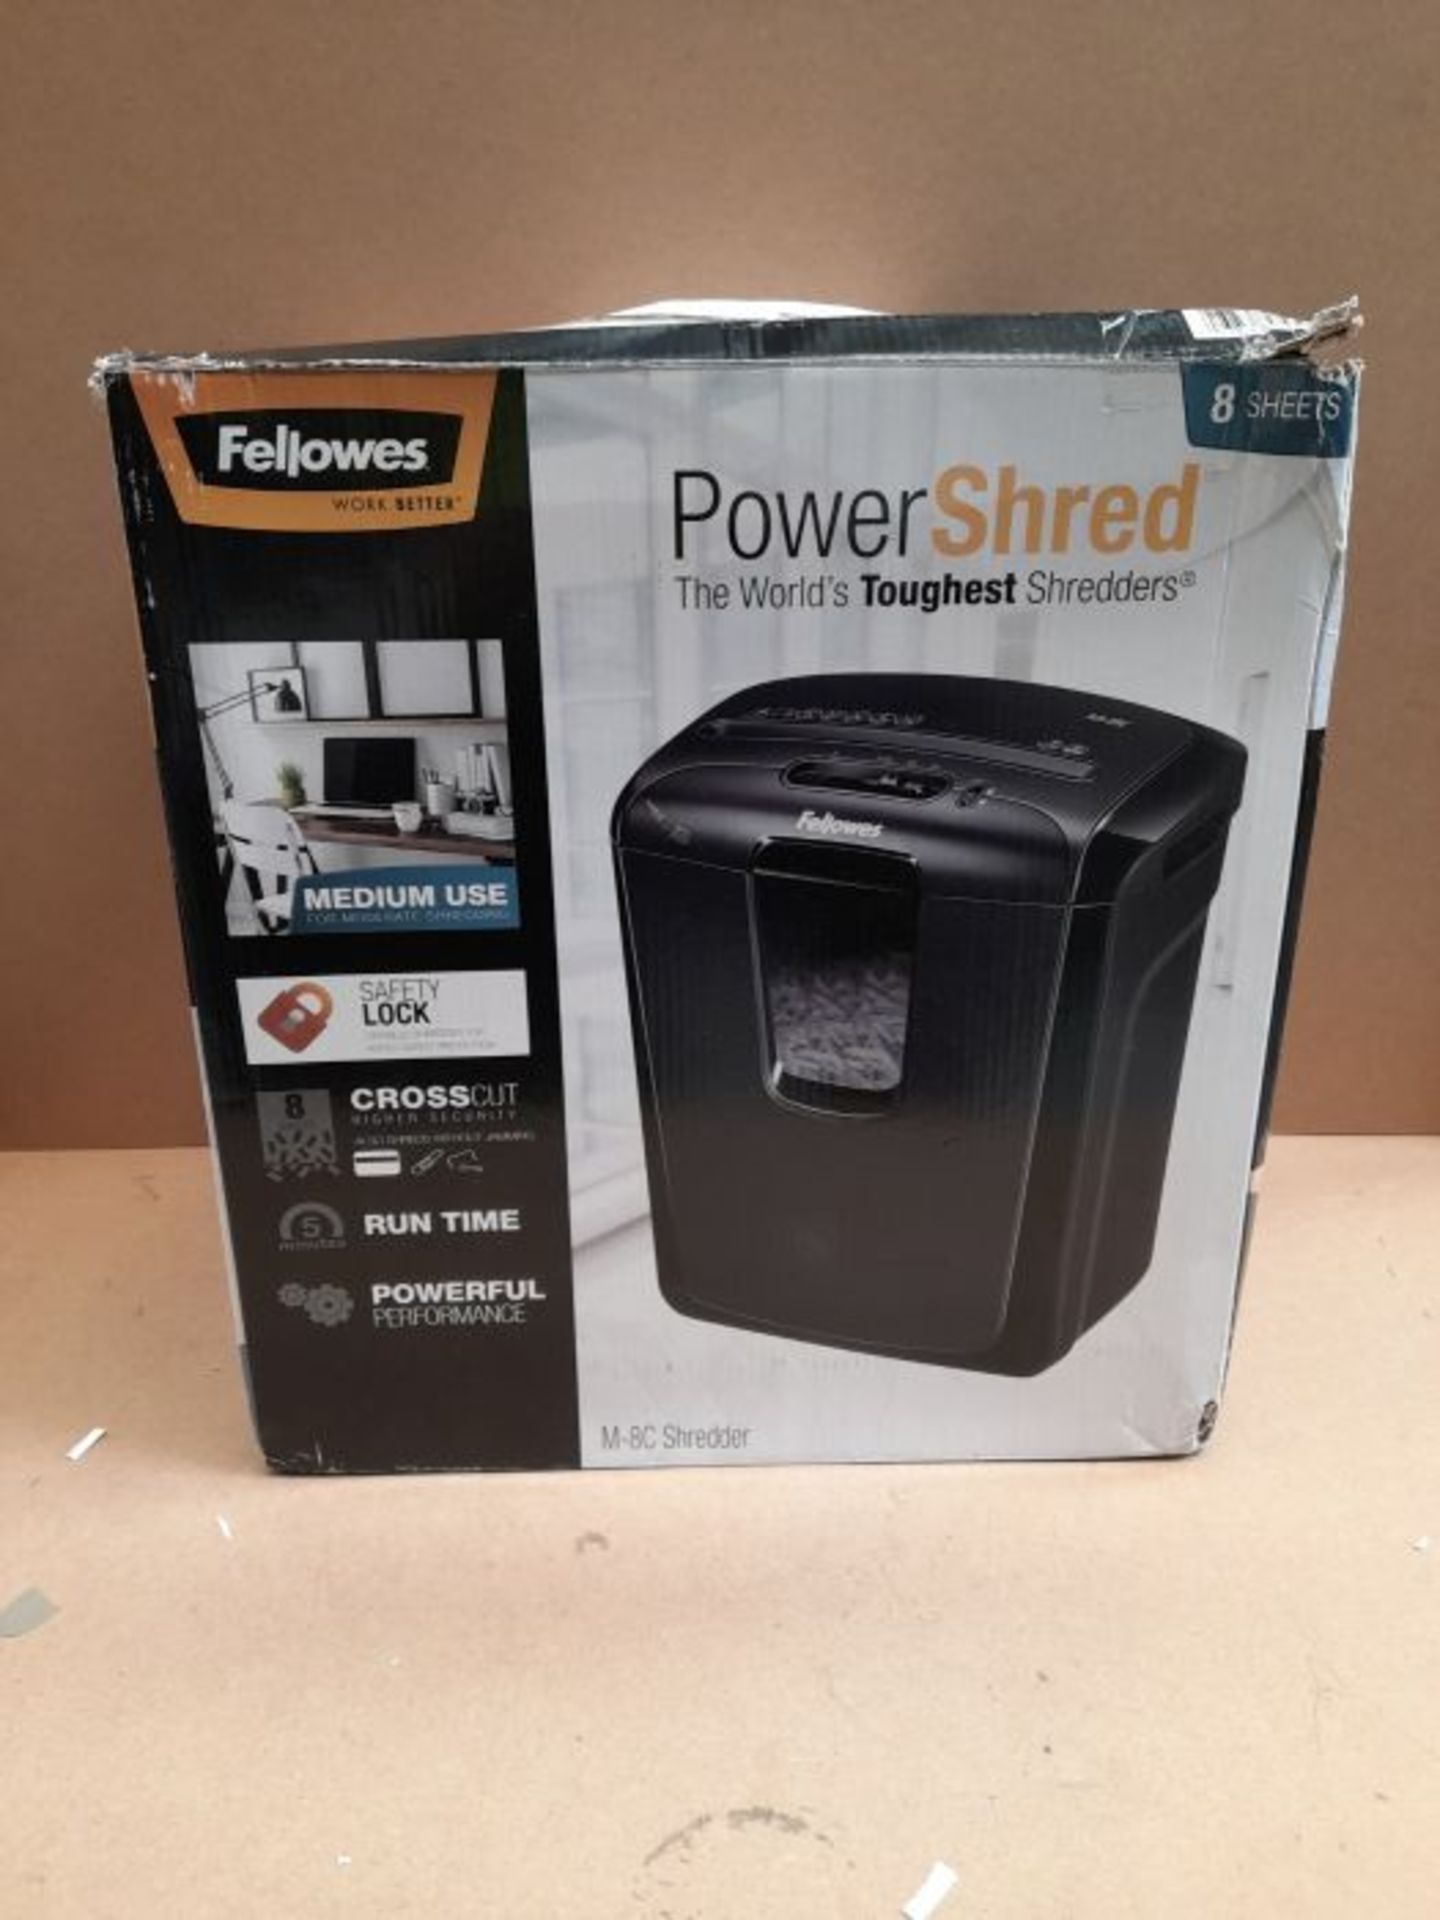 Fellowes Powershred M-8C 8 Sheet Cross Cut Personal Shredder with Safety Lock - Image 5 of 6